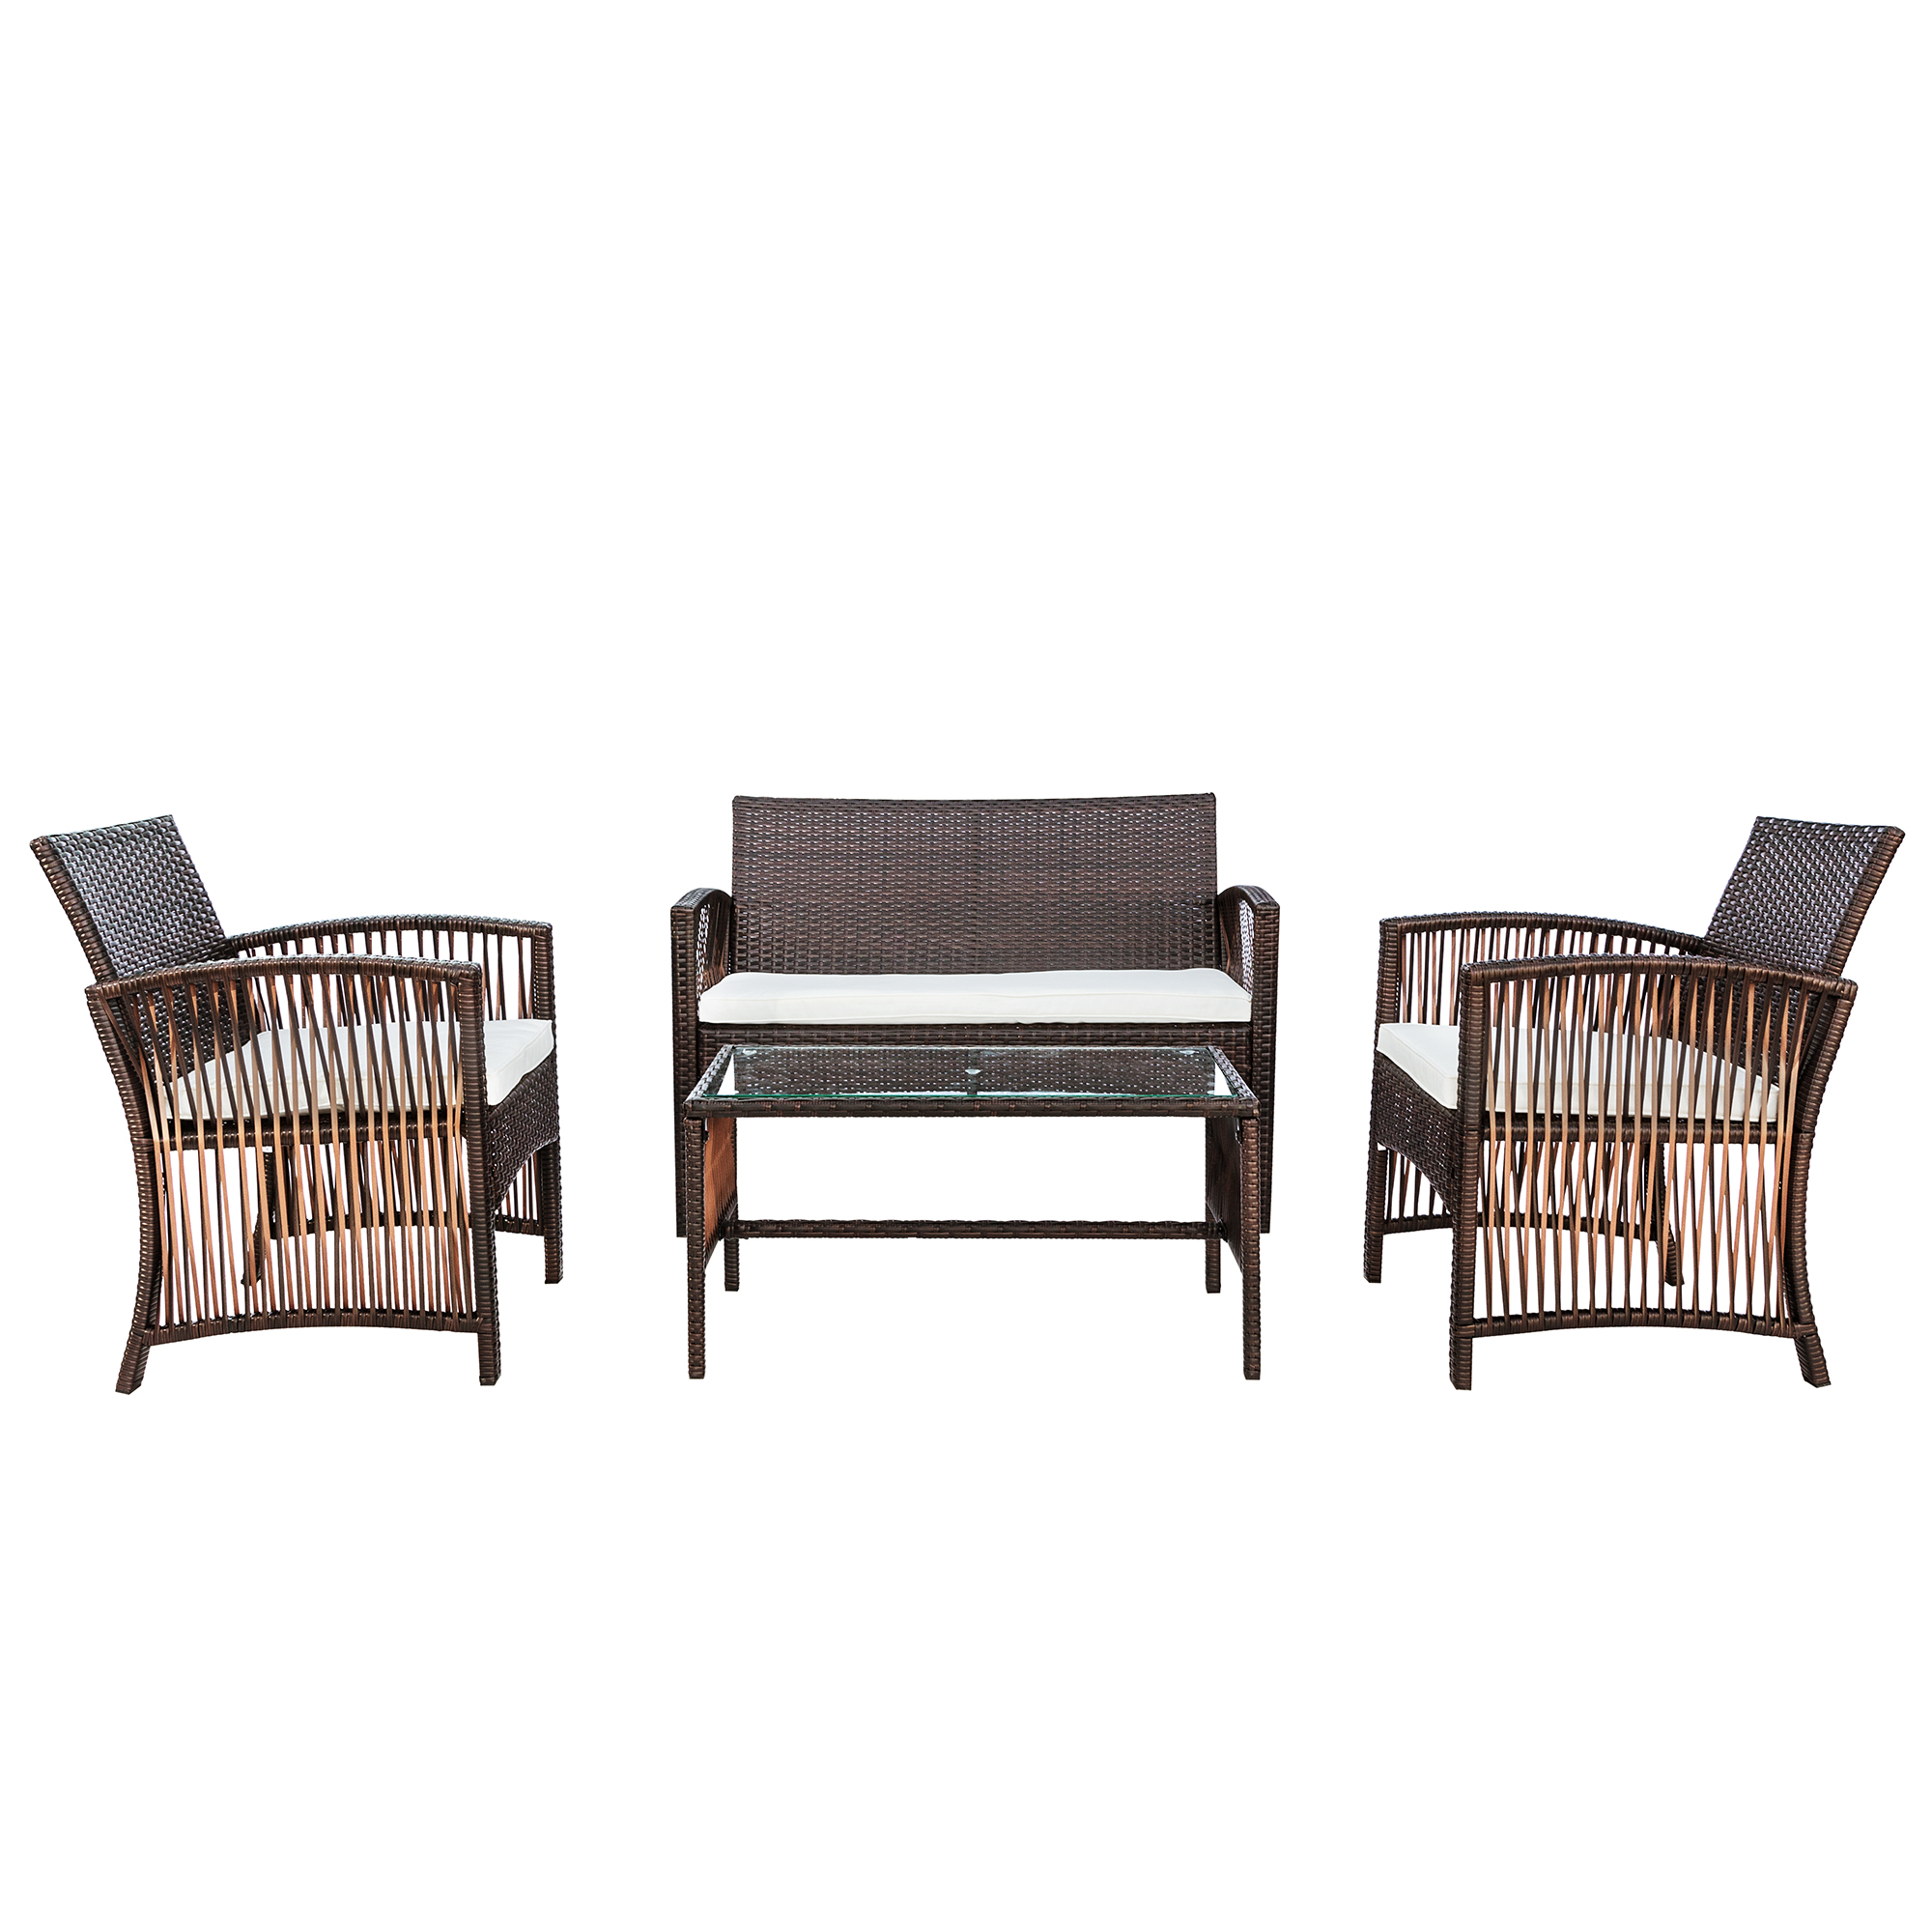 4 Pieces Rattan Chair Wicker Set, Outdoor Patio Furniture Sets Clearance with Two Single Sofa, One Loveseat, Tempered Glass Table, Backyard Porch Garden Poolside Balcony Furniture Sets, Q8553 - image 5 of 12